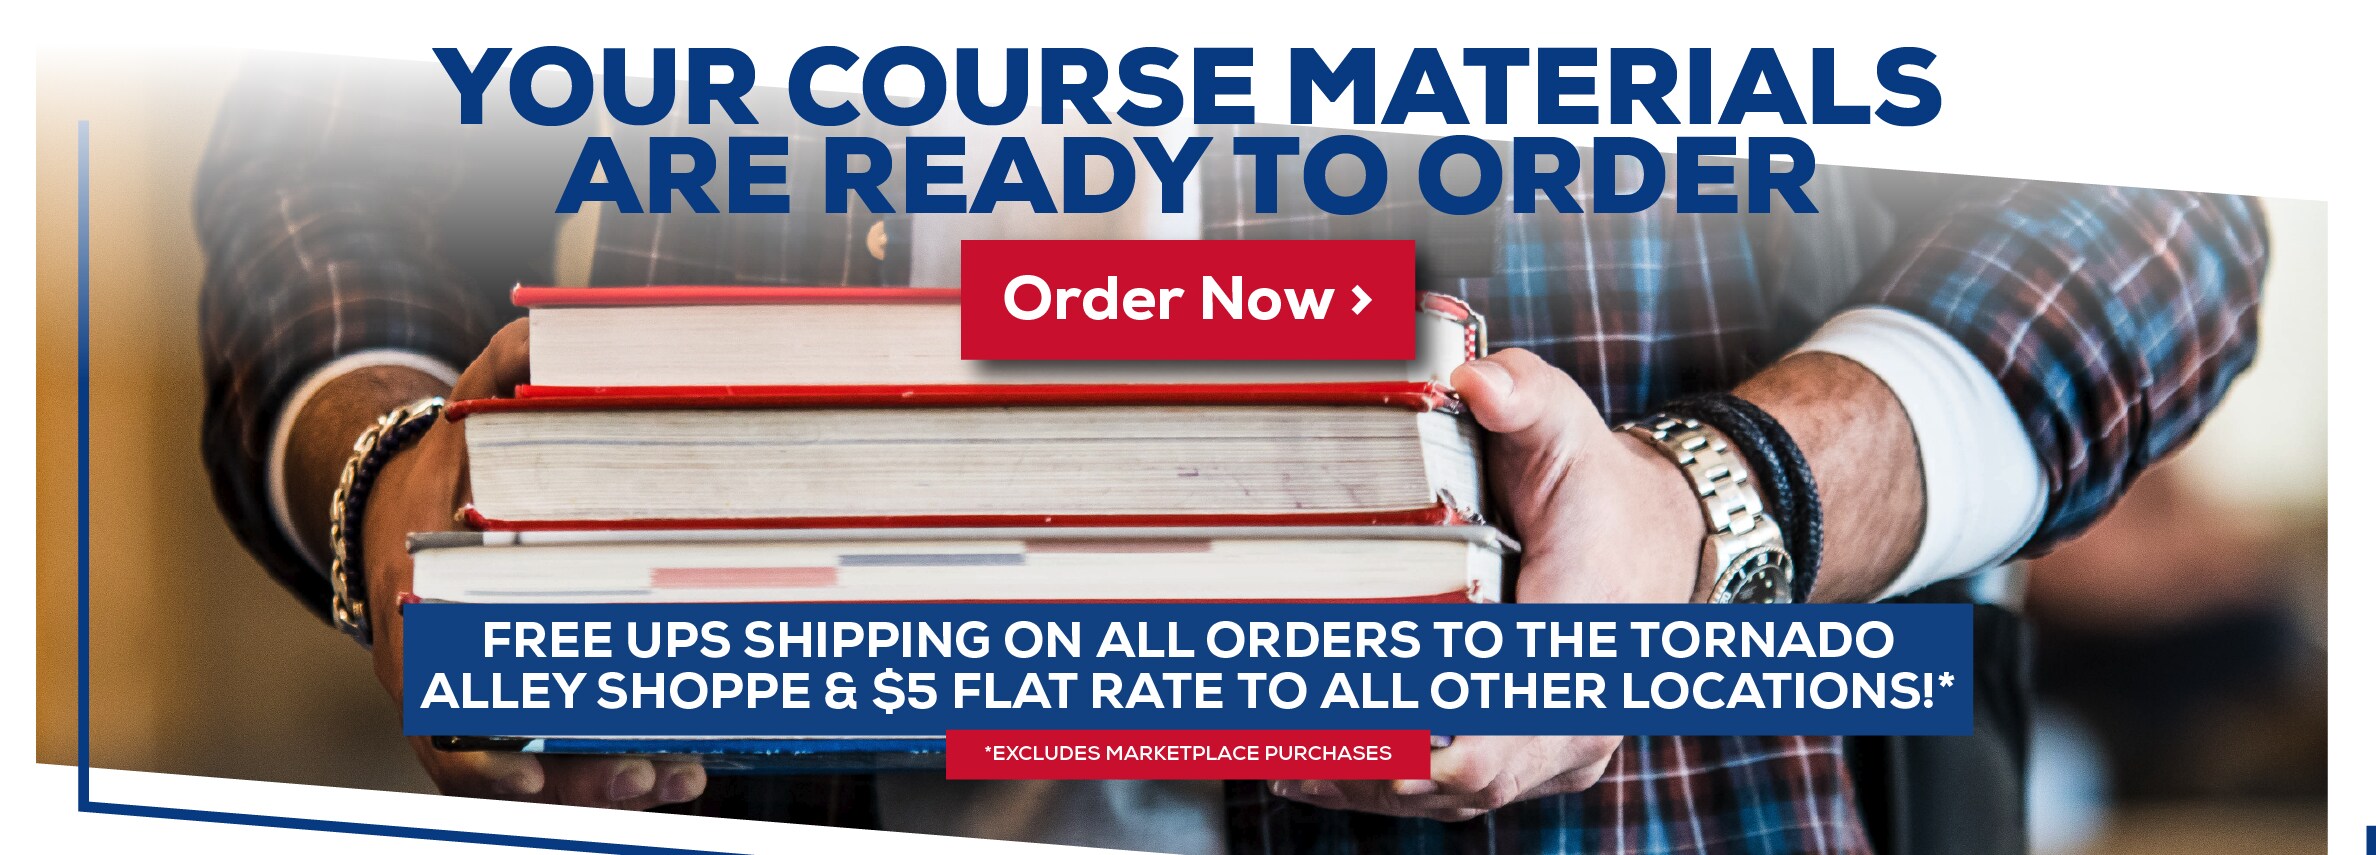 Your Course Materials are Ready to Order. Order Now. Free UPS Shipping on all orders to the Tornado Alley Shoppe & $5 Flat Rate to all other locations! *Excludes marketplace purchases.